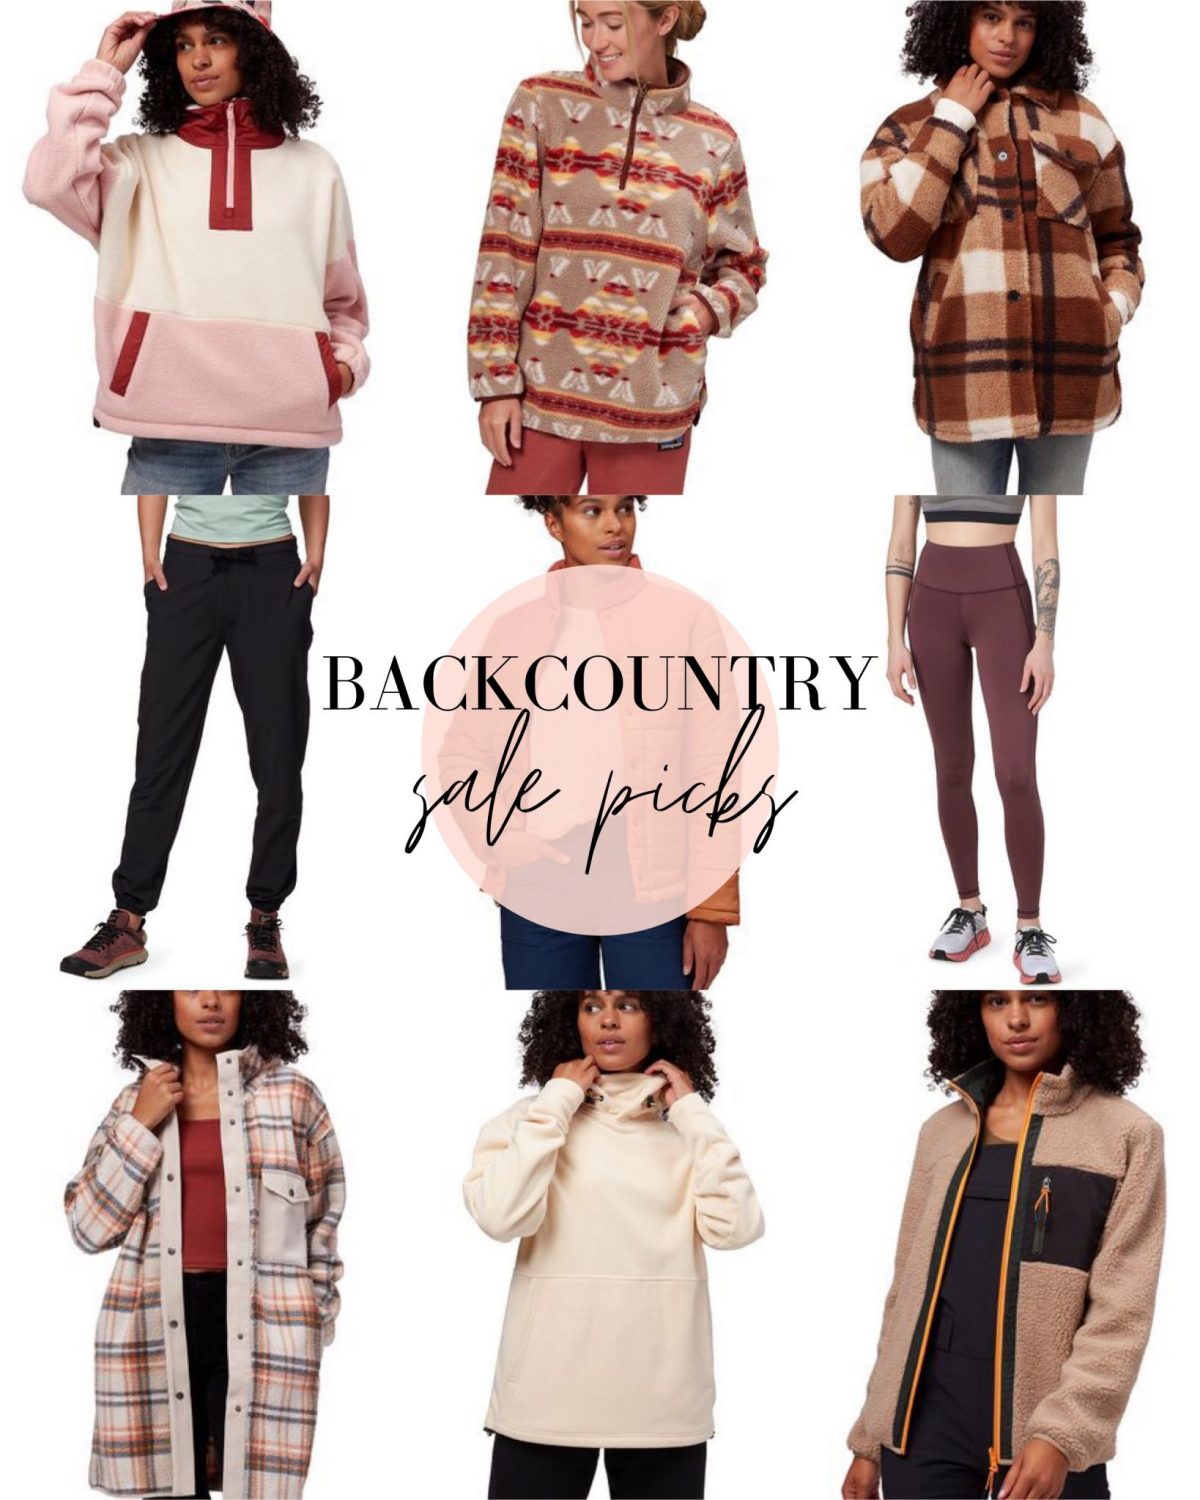 Back Country sale picks